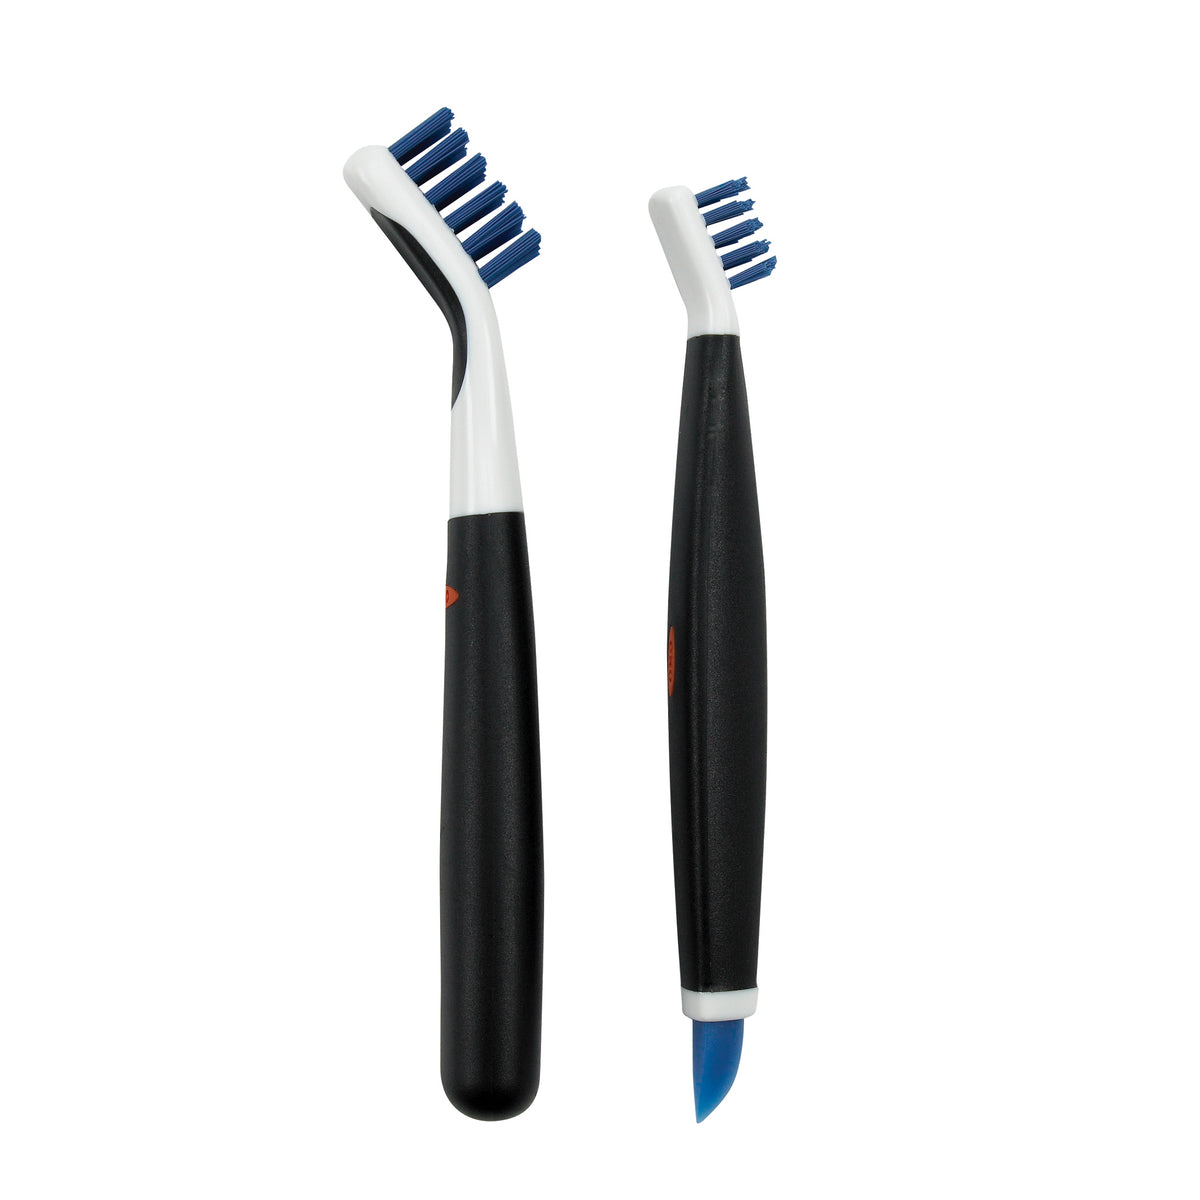 OXO Good Grips Deep Cleaning Detail Brush Set — KitchenKapers